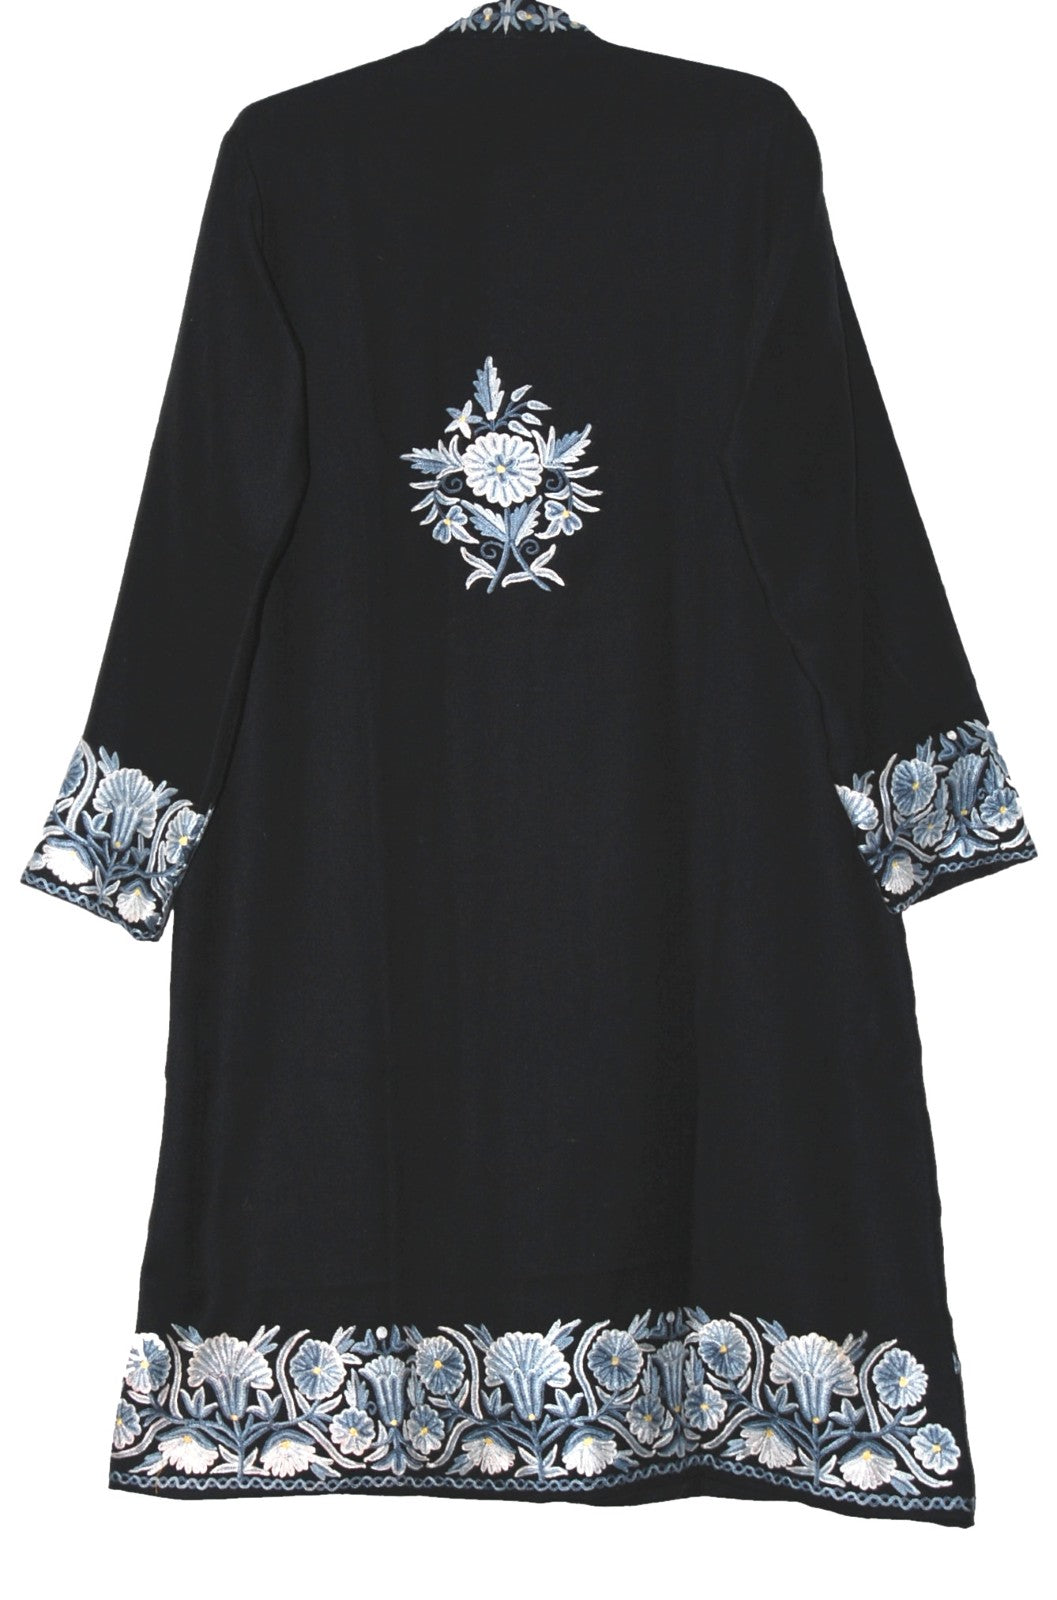 Woolen Coat Long Jacket Black, Grey and White Embroidery #BD-124